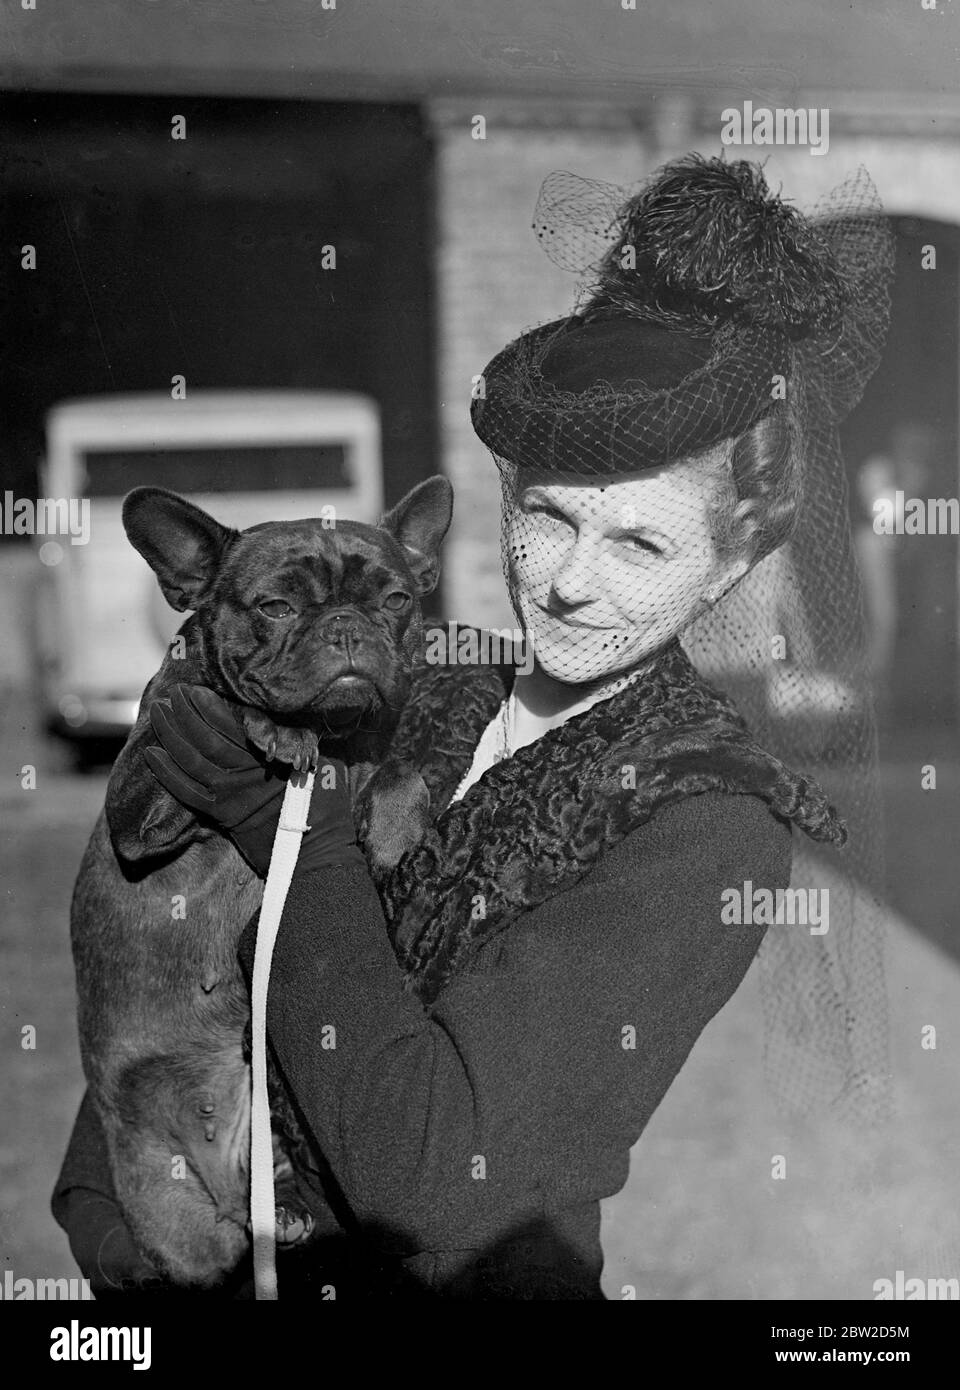 The Show of the Keeshon club and French Bulldog club is taking place at Tattershall, Knightsbridge, London. Photo shows: an attractive veiled hat worn by Mrs George Stephens, who is holding Jennifer of Silpho, a French Bulldog exhibited by Mrs David Sugden. 26 October 1938 Stock Photo